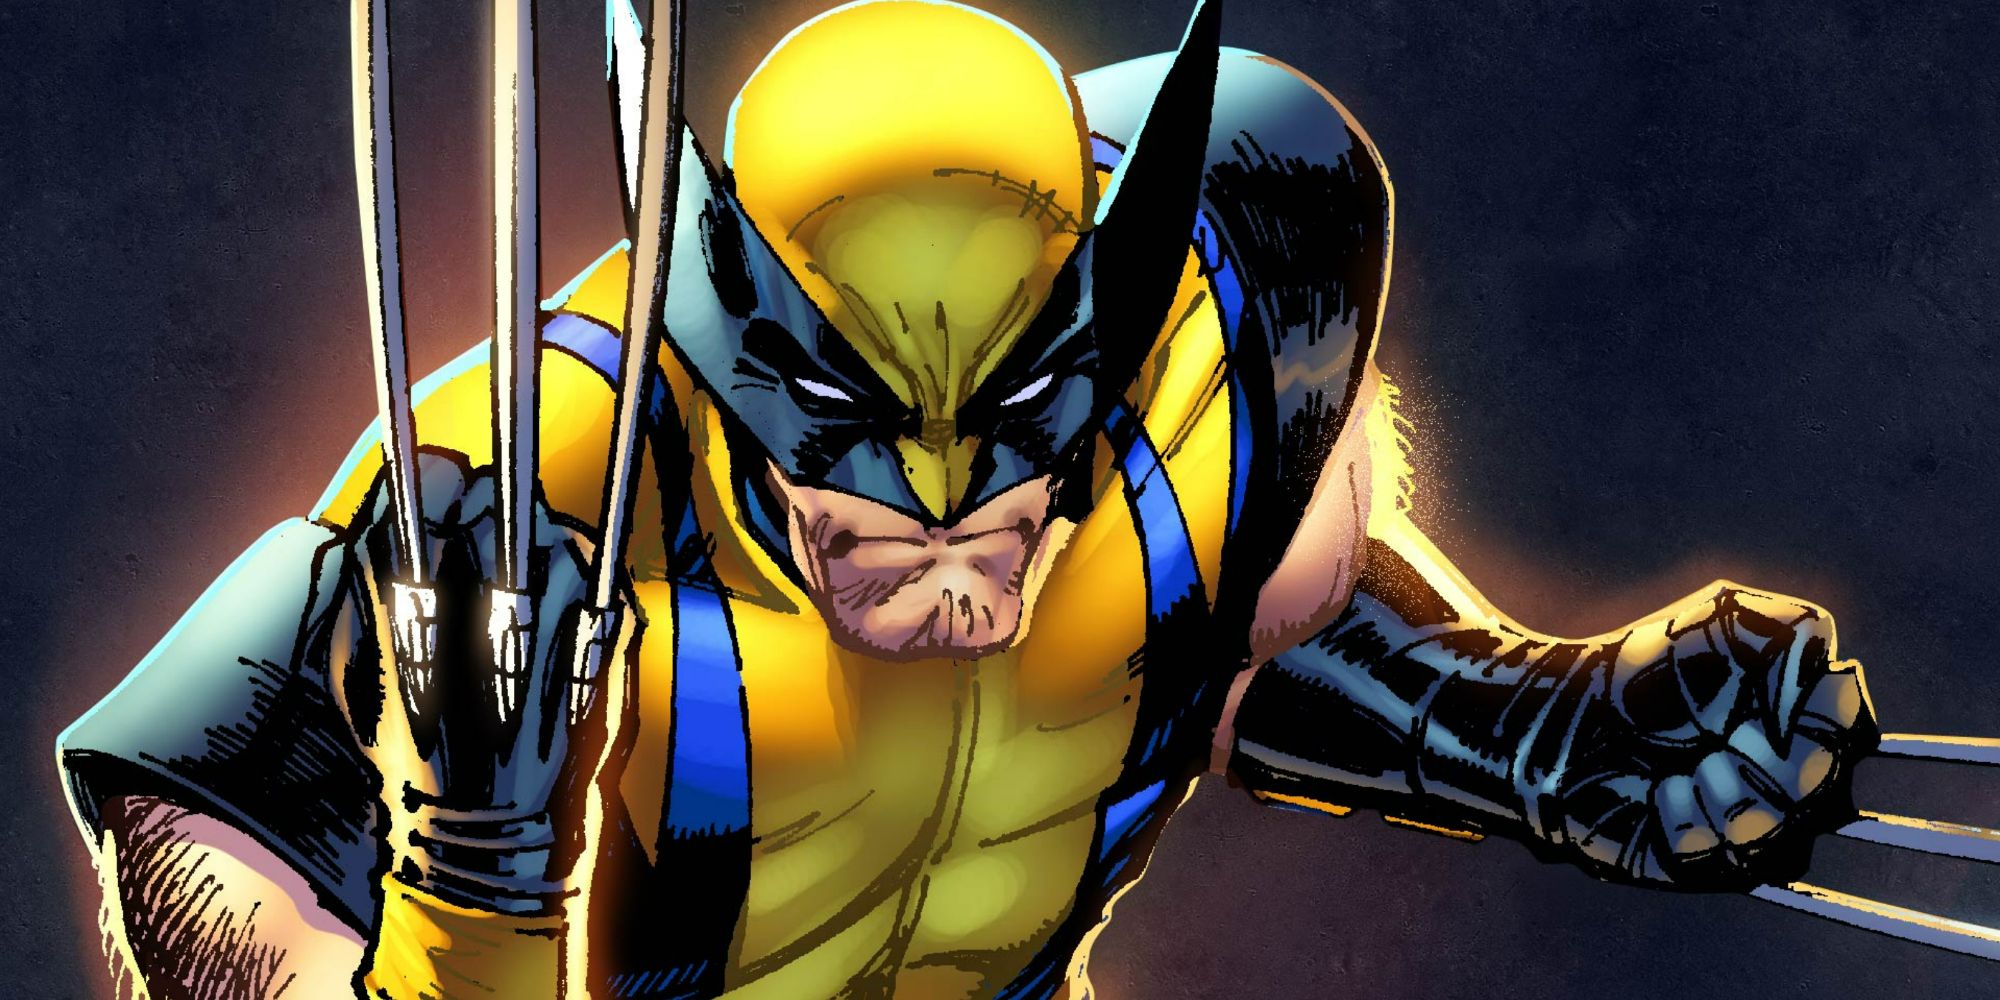 Wolverine brandishes his claws in Marvel Comics